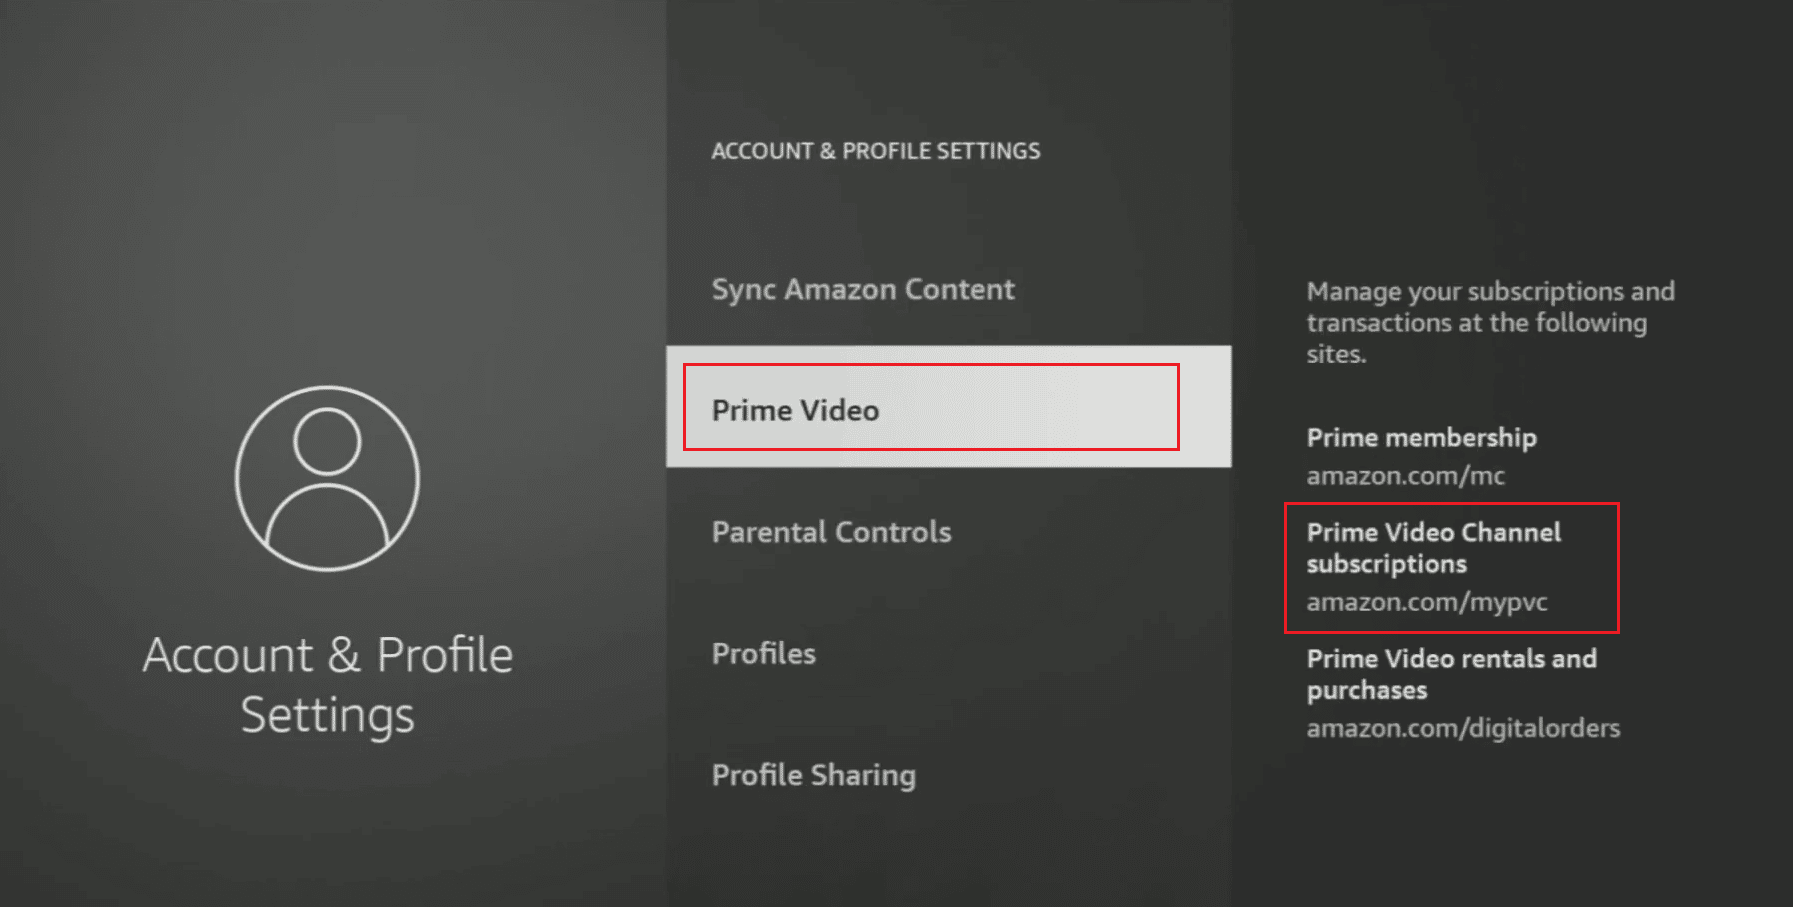 Prime Video - navigate to the amazon.com mypvc link on your browser mentioned under Prime Video Channel subscriptions